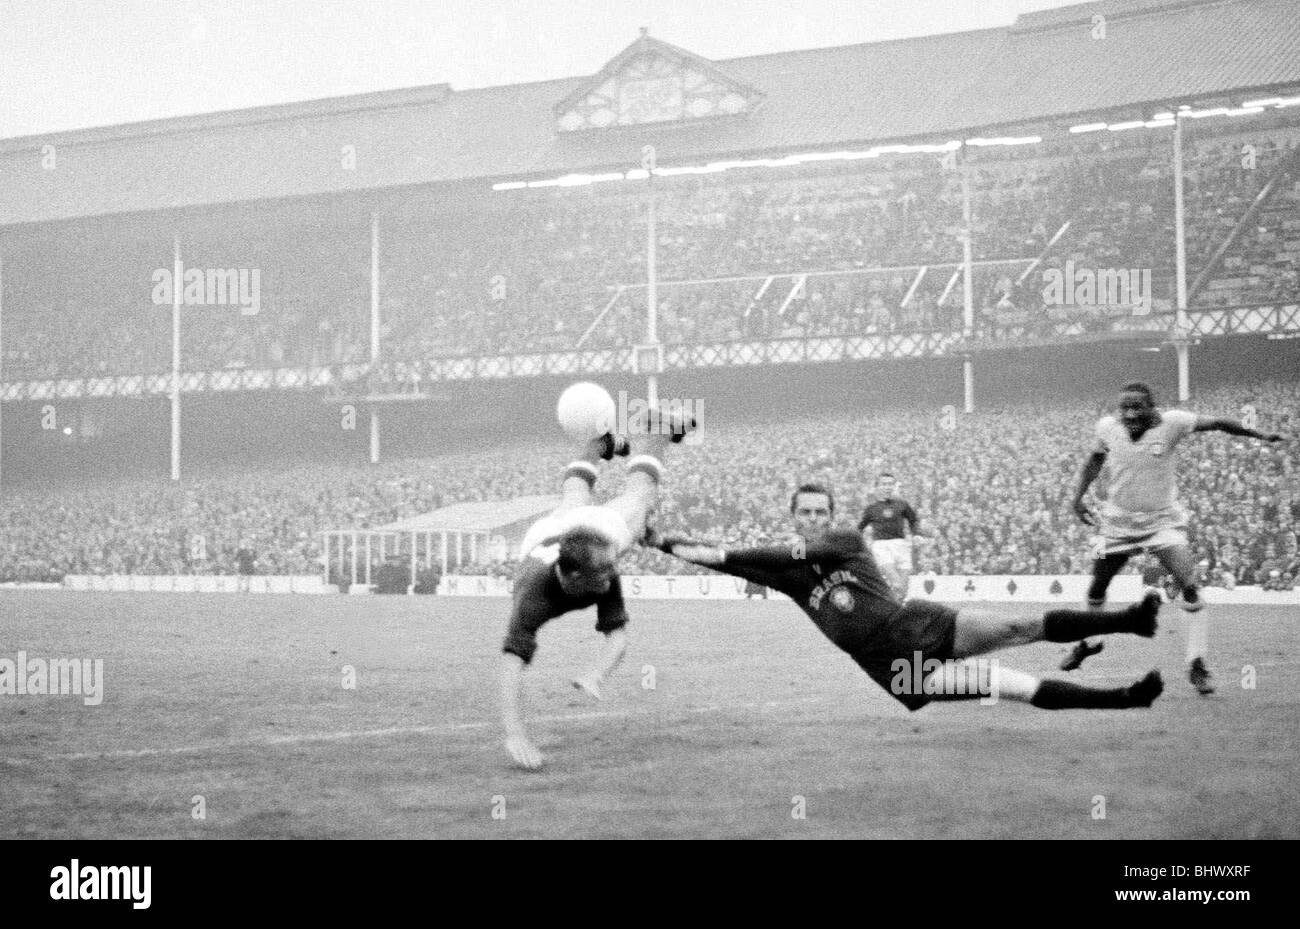 World Cup Brazil versus Hungary at Goodison Park 15th July 1966 Fresco and Owens Brazil's goal keeper challenges Hungarian player's attempt to score W6820 13c July 1966 1960s ©Mirrorpix Stock Photo